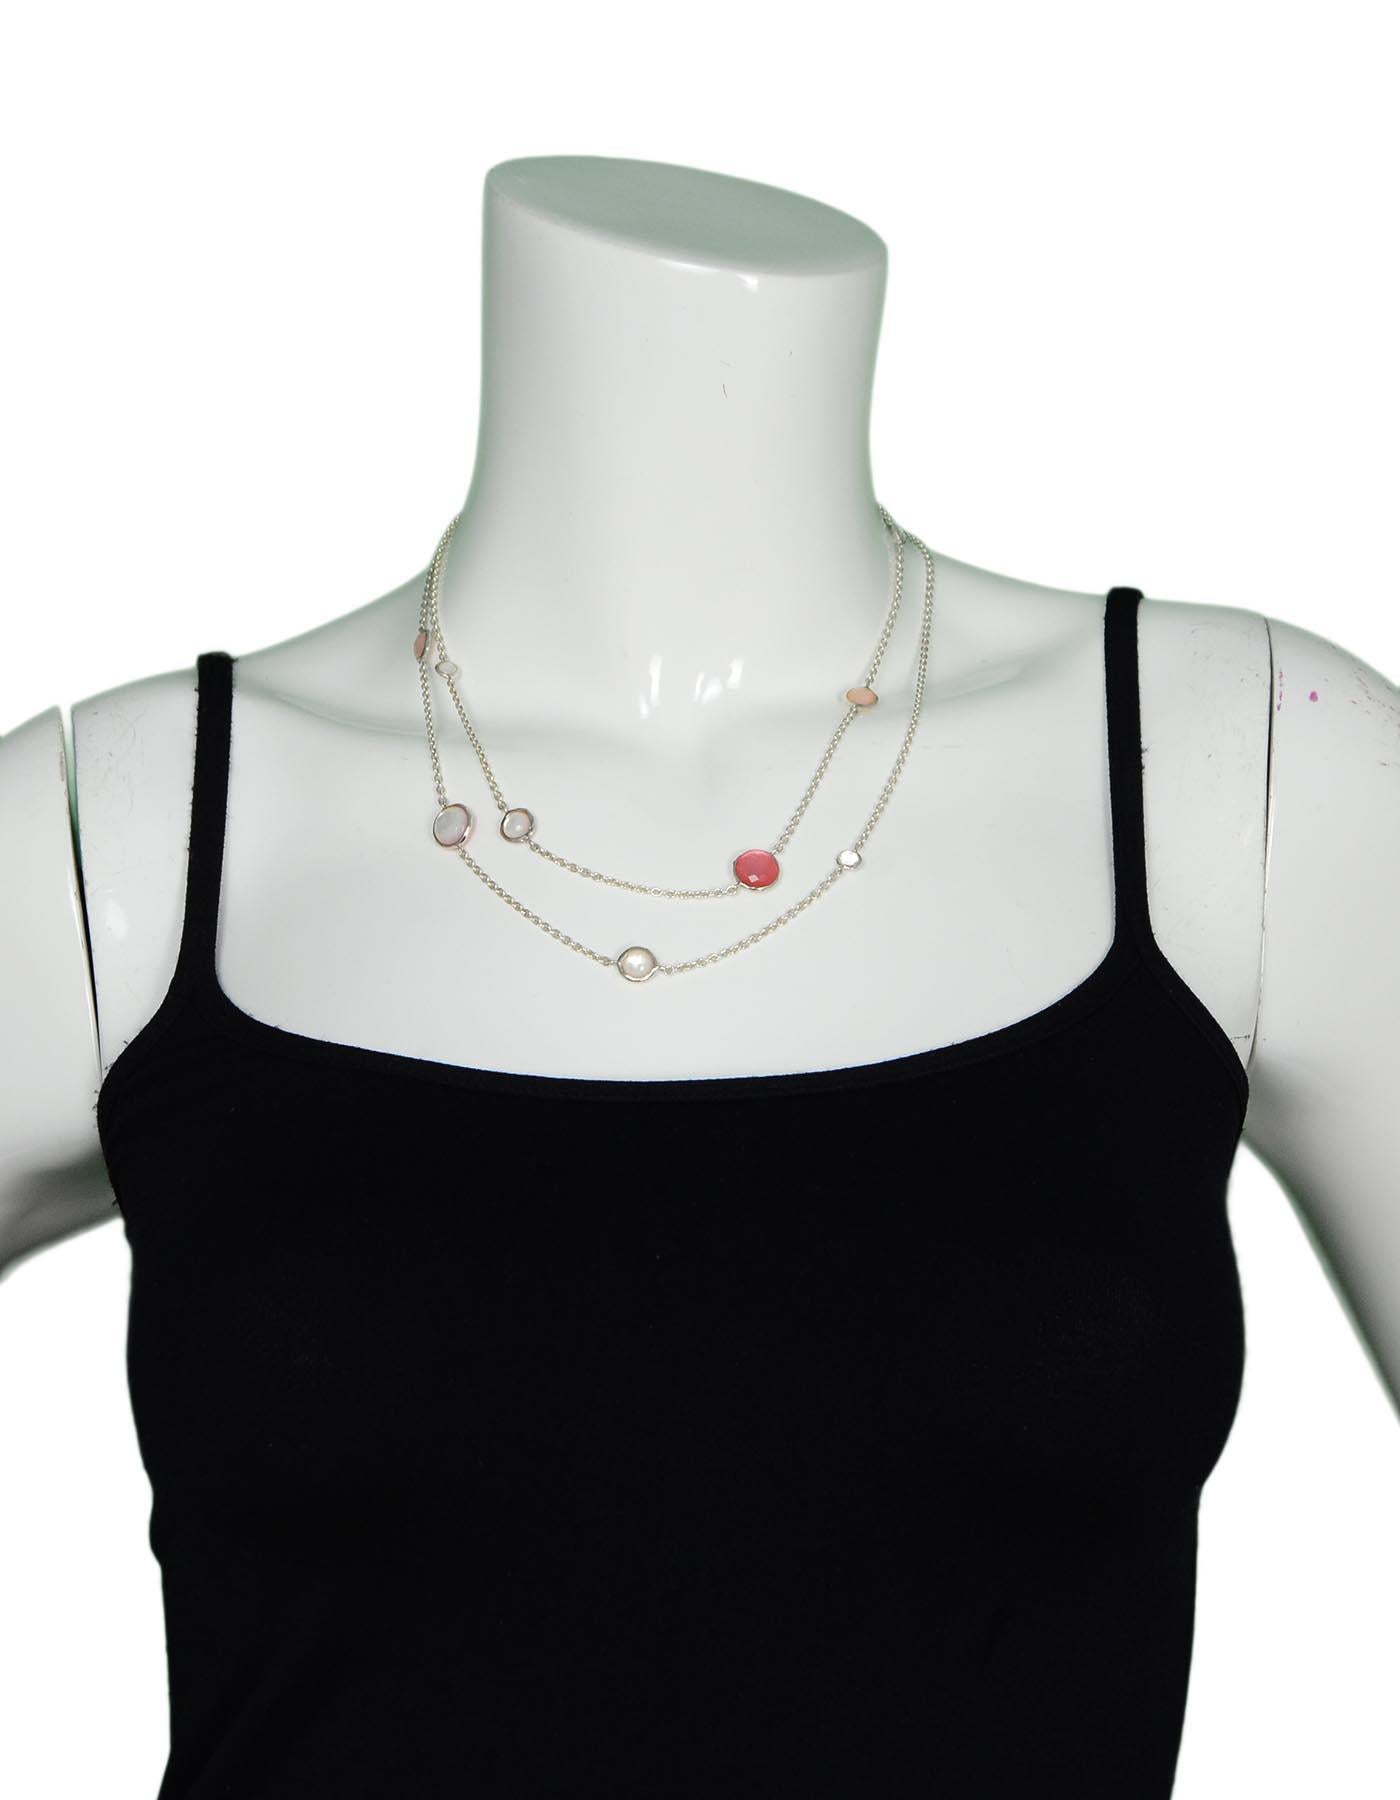 Ippolita Sterling Silver/Peach Quartz/Mother of Pearl Doublet Wonderland Station Necklace

Color: Silver, peach, white
Materials:  Sterling silver, quartz, mother of pearl
Hallmarks:  